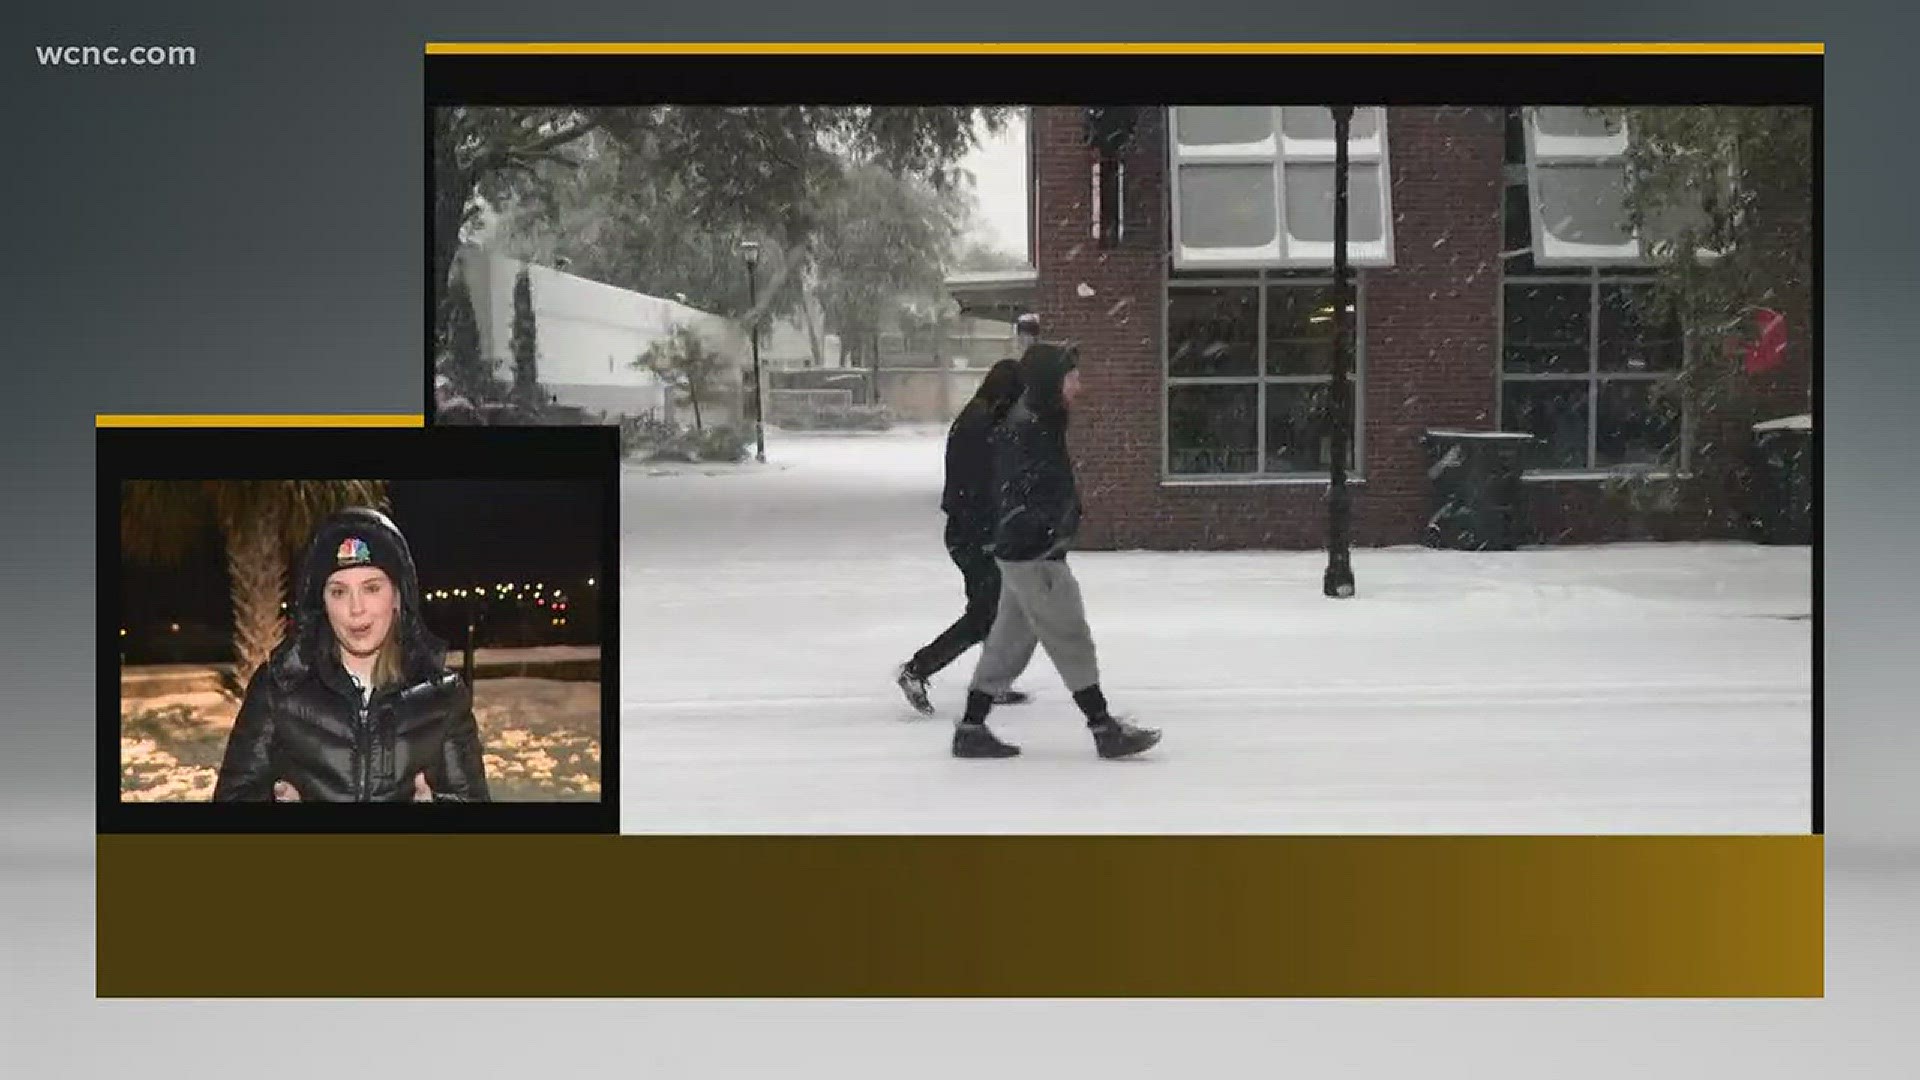 Charleston residents dealing with historic snowstorm